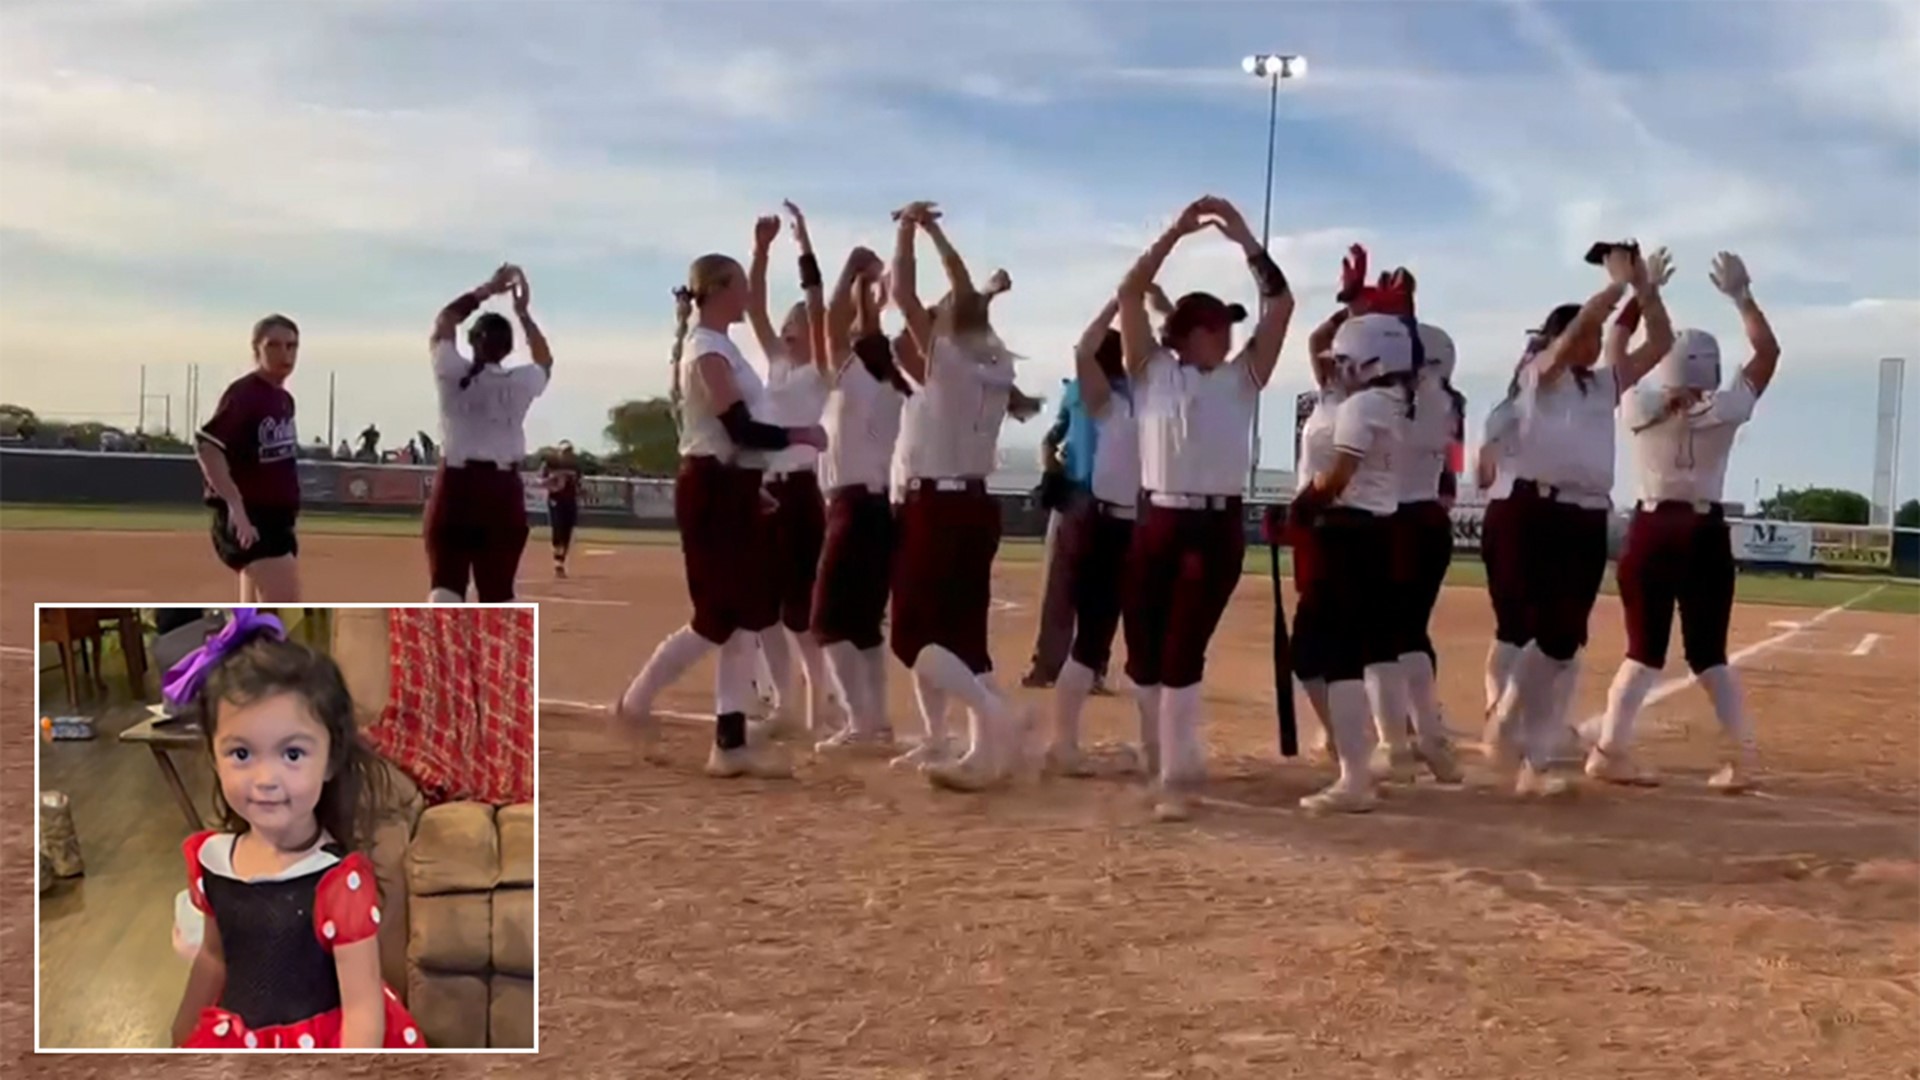 The Calallen team does a twirl at home plate after home runs. It's a twirl inspired by 5-year-old Eva Lozano.